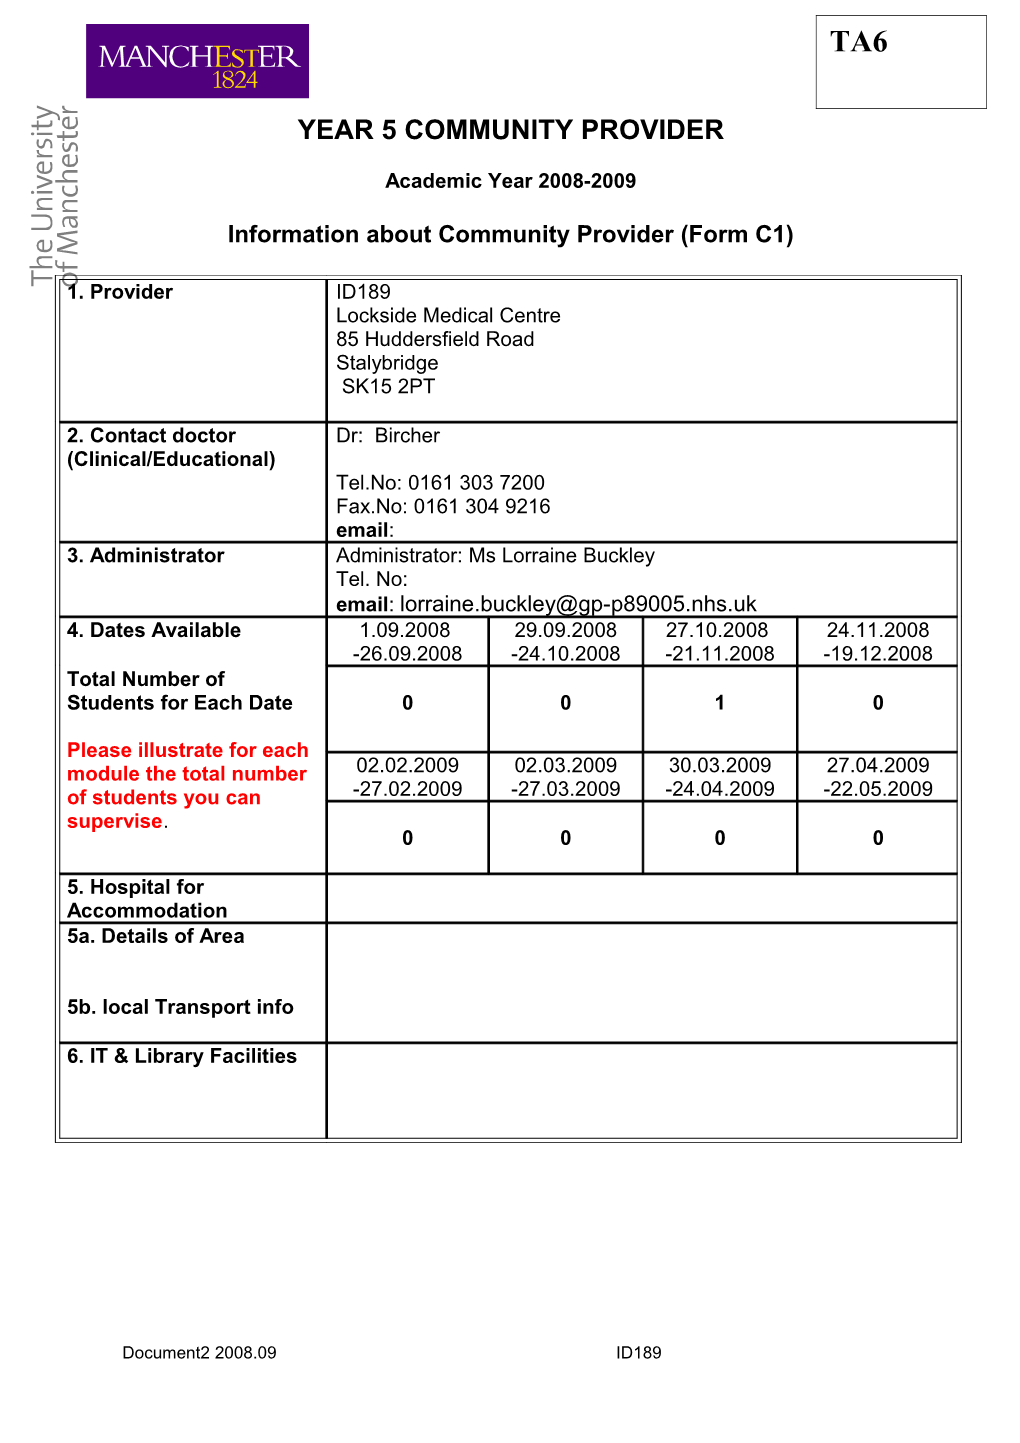 Information About Community Provider (Form C1)